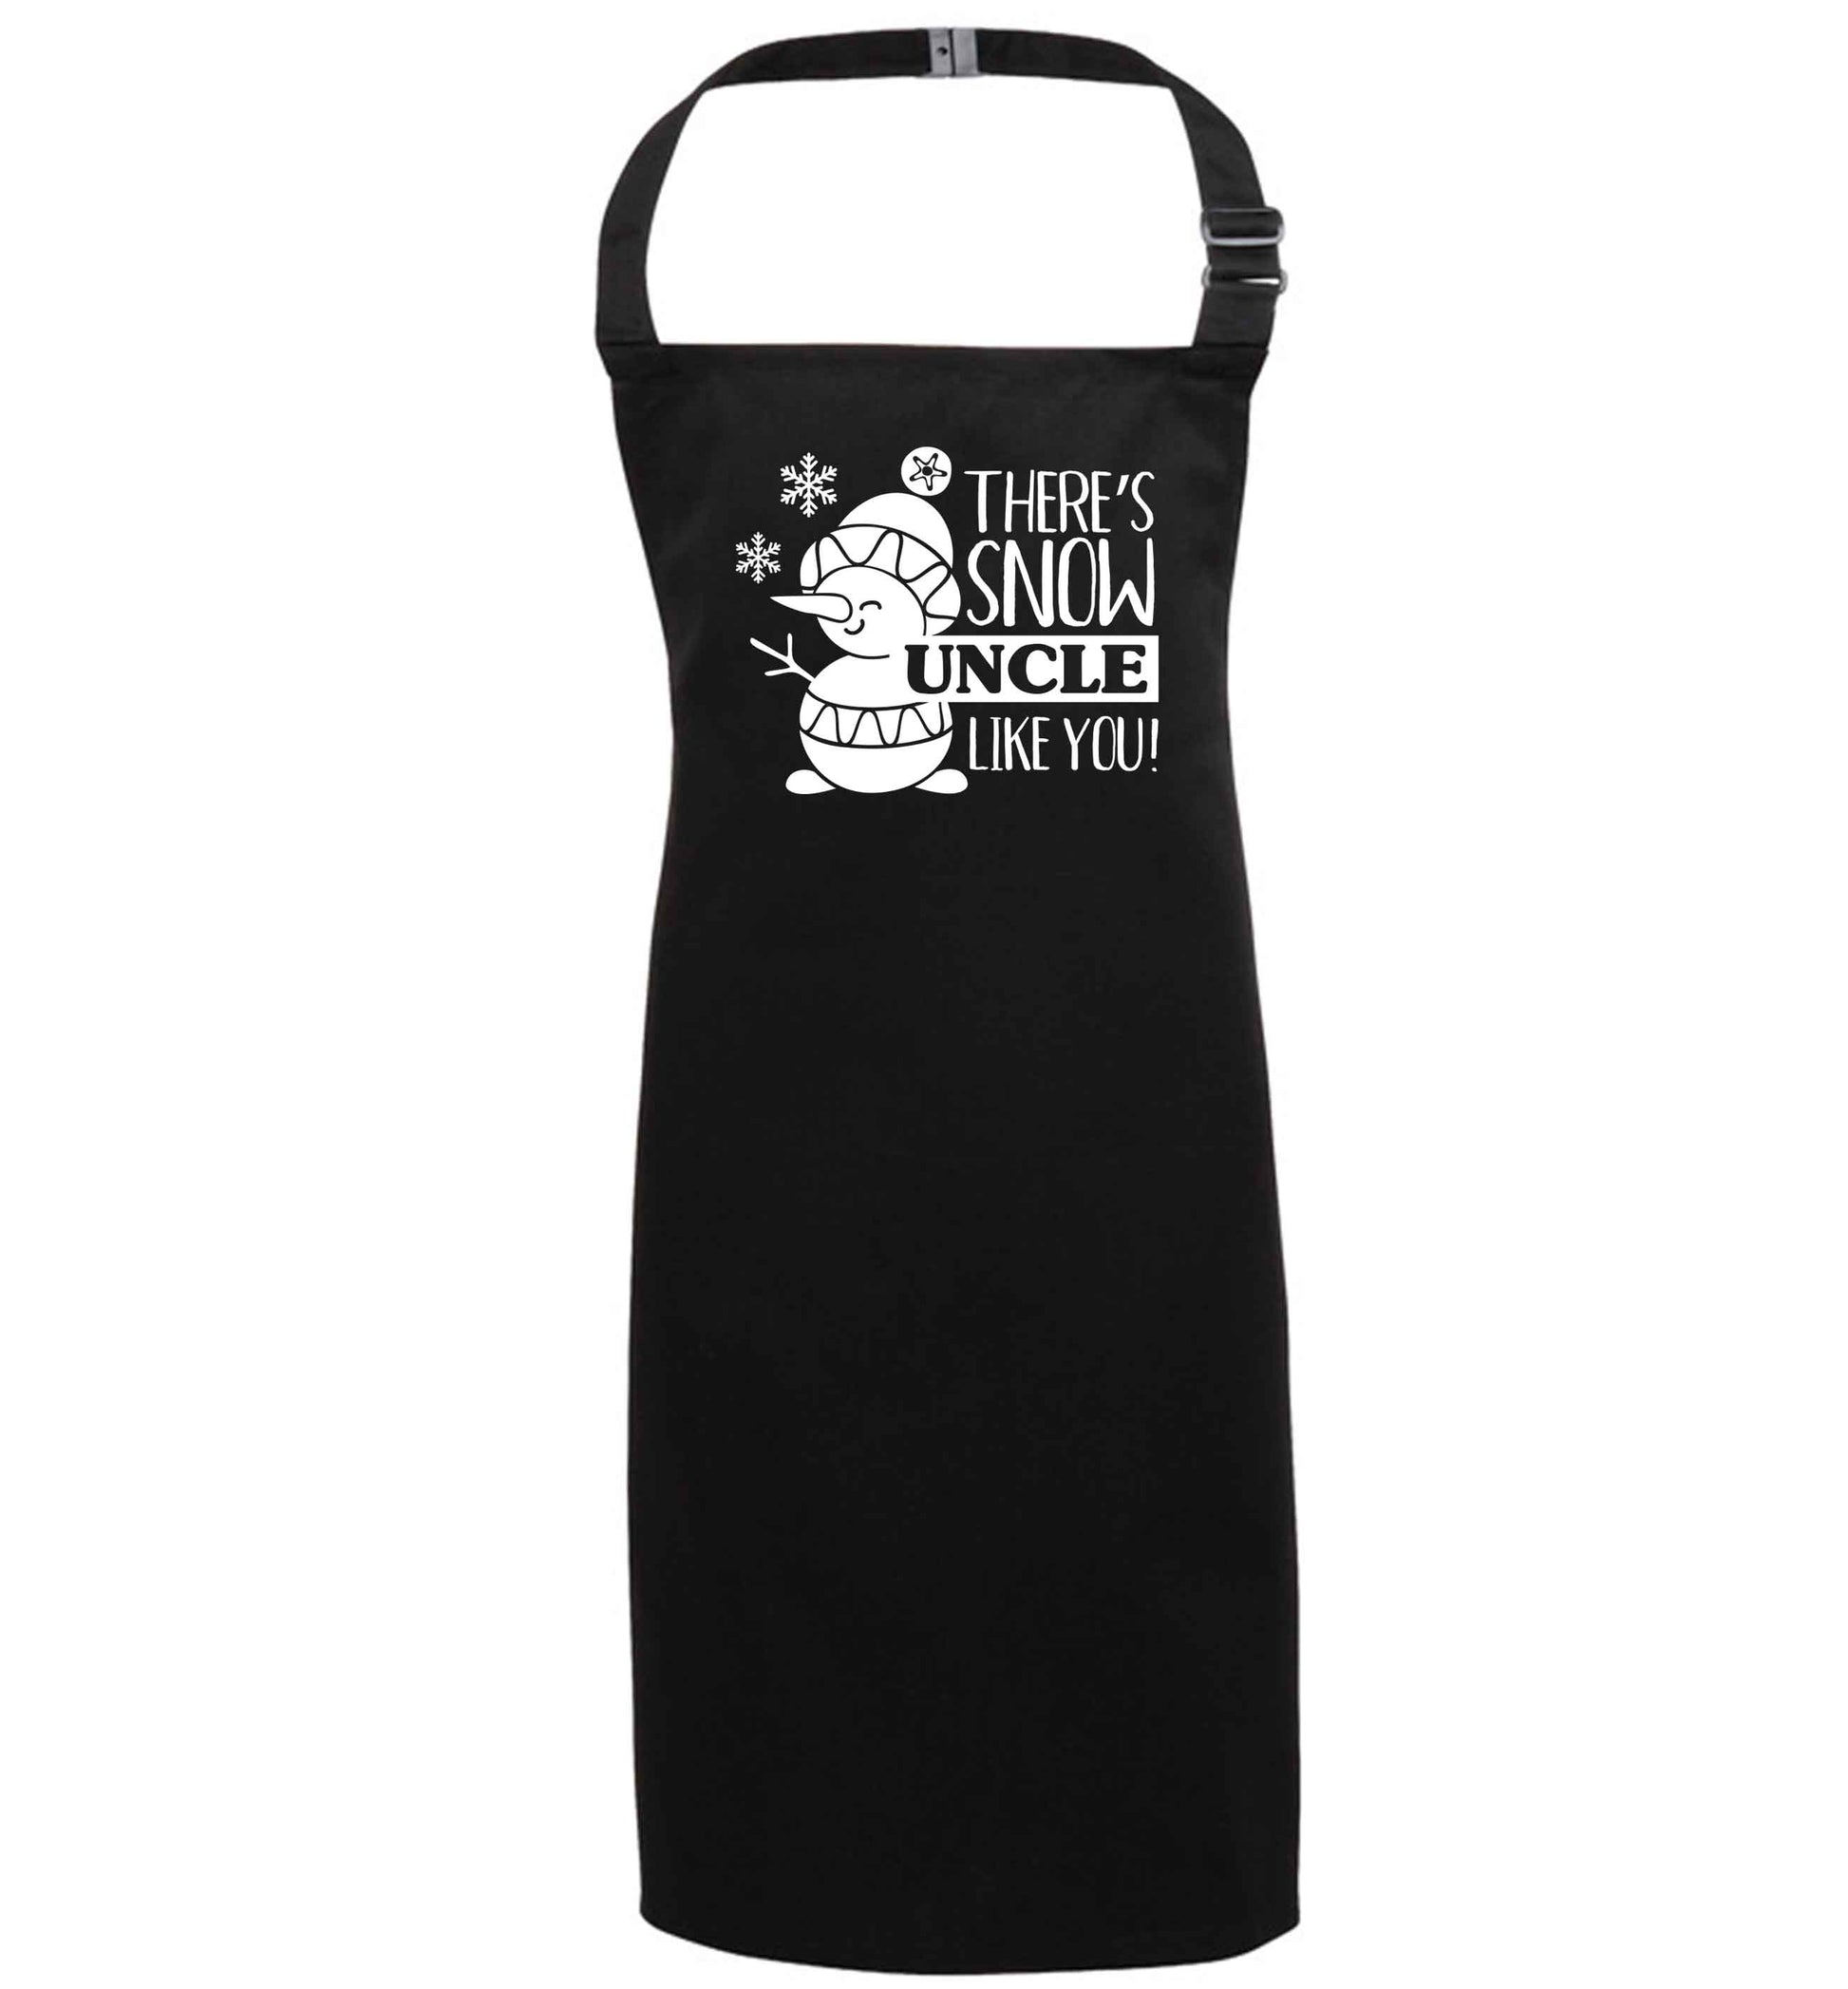 There's snow uncle like you black apron 7-10 years